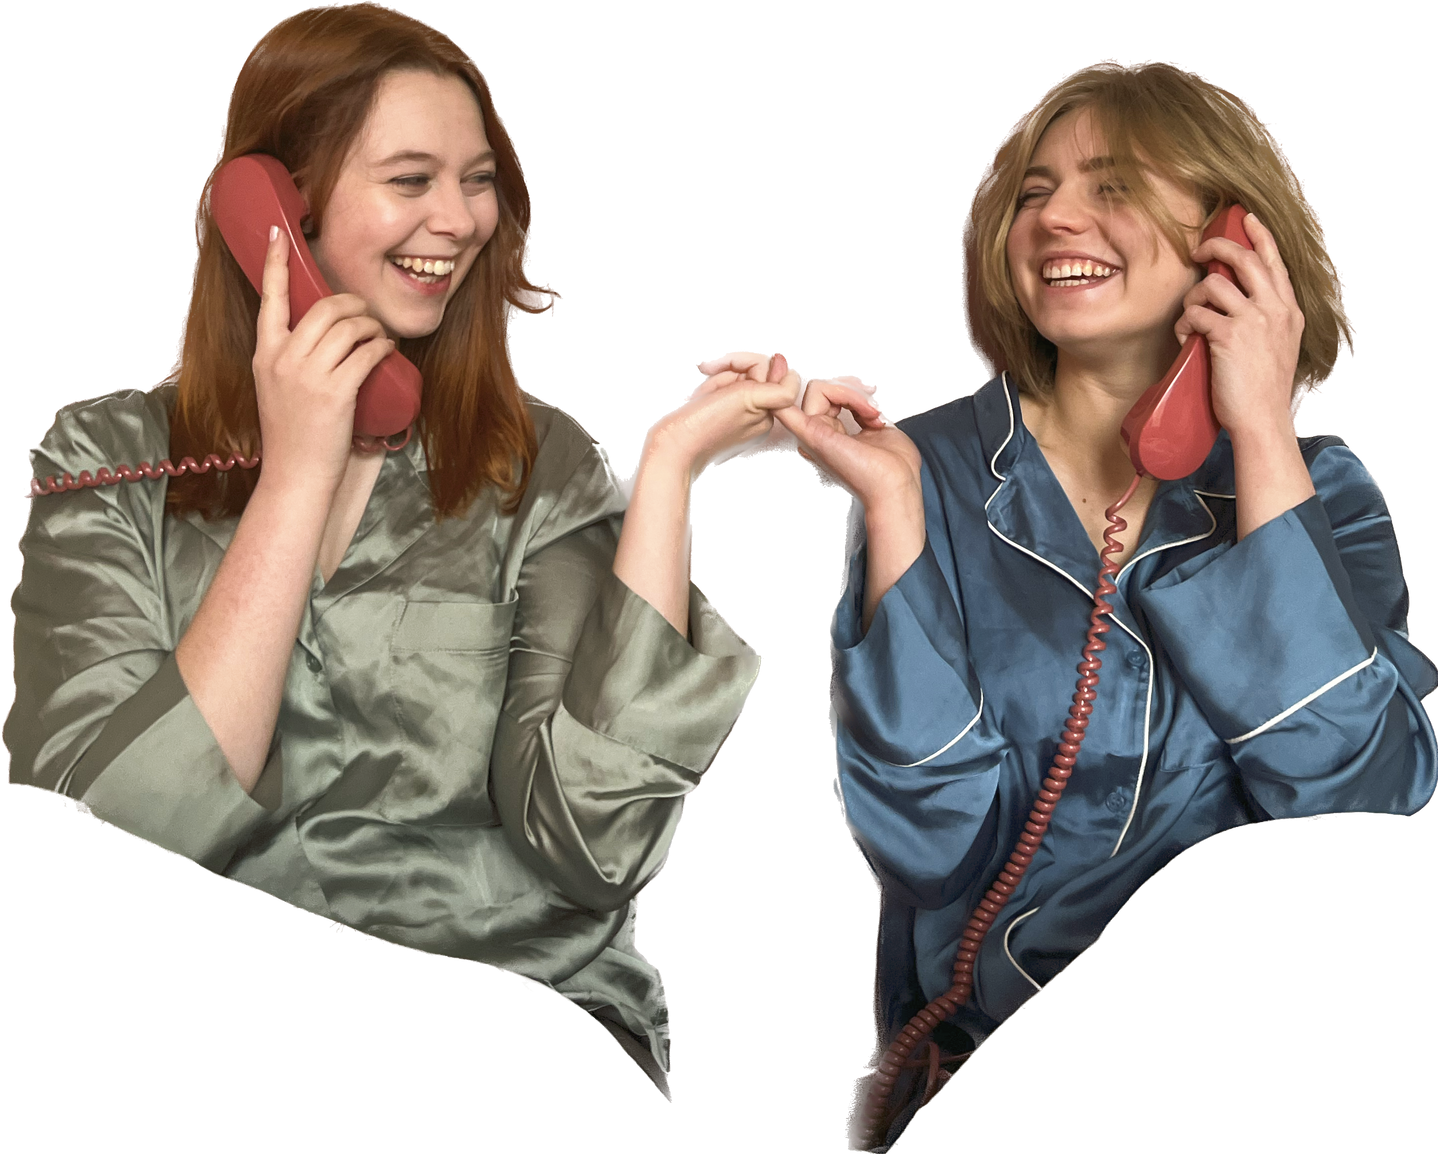 Abbie and Becky hold pink landline phones and smile at each other, locking their pinky fingers.